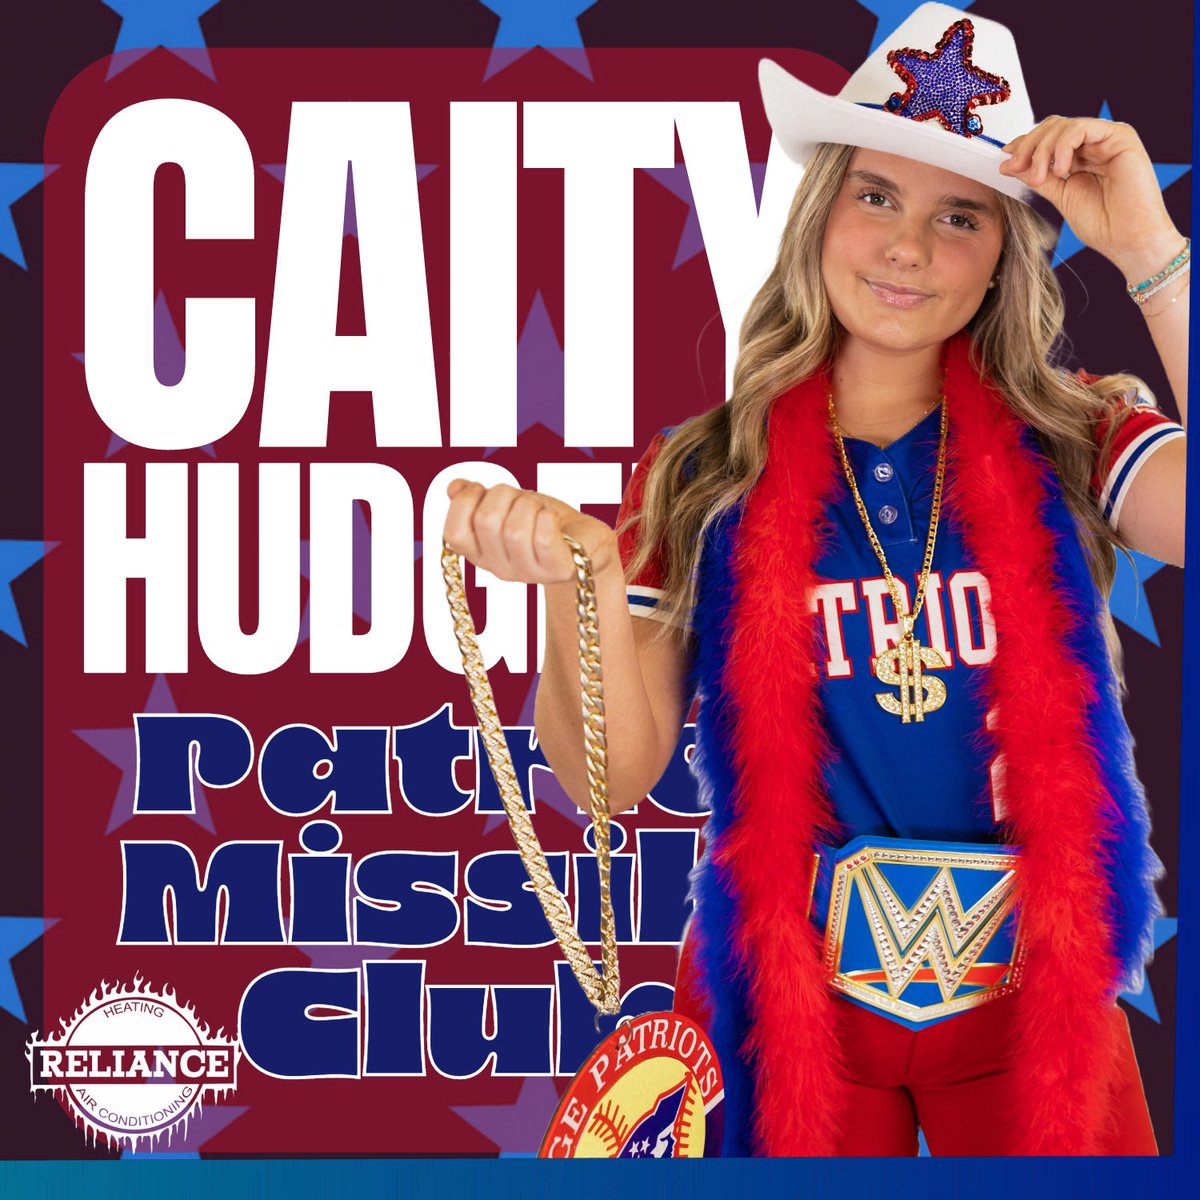 ⚠️ 🚀 JV Patriot Missile Club Member Alert 🚀⚠️ @CaitlynHudgens smoked one💥💨 to center field for her 1️⃣st 🚀 Patriot Missile of the season, JV’s 9️⃣th! #PagePride 🚀🚀🚀🚀🚀🚀🚀🚀🚀